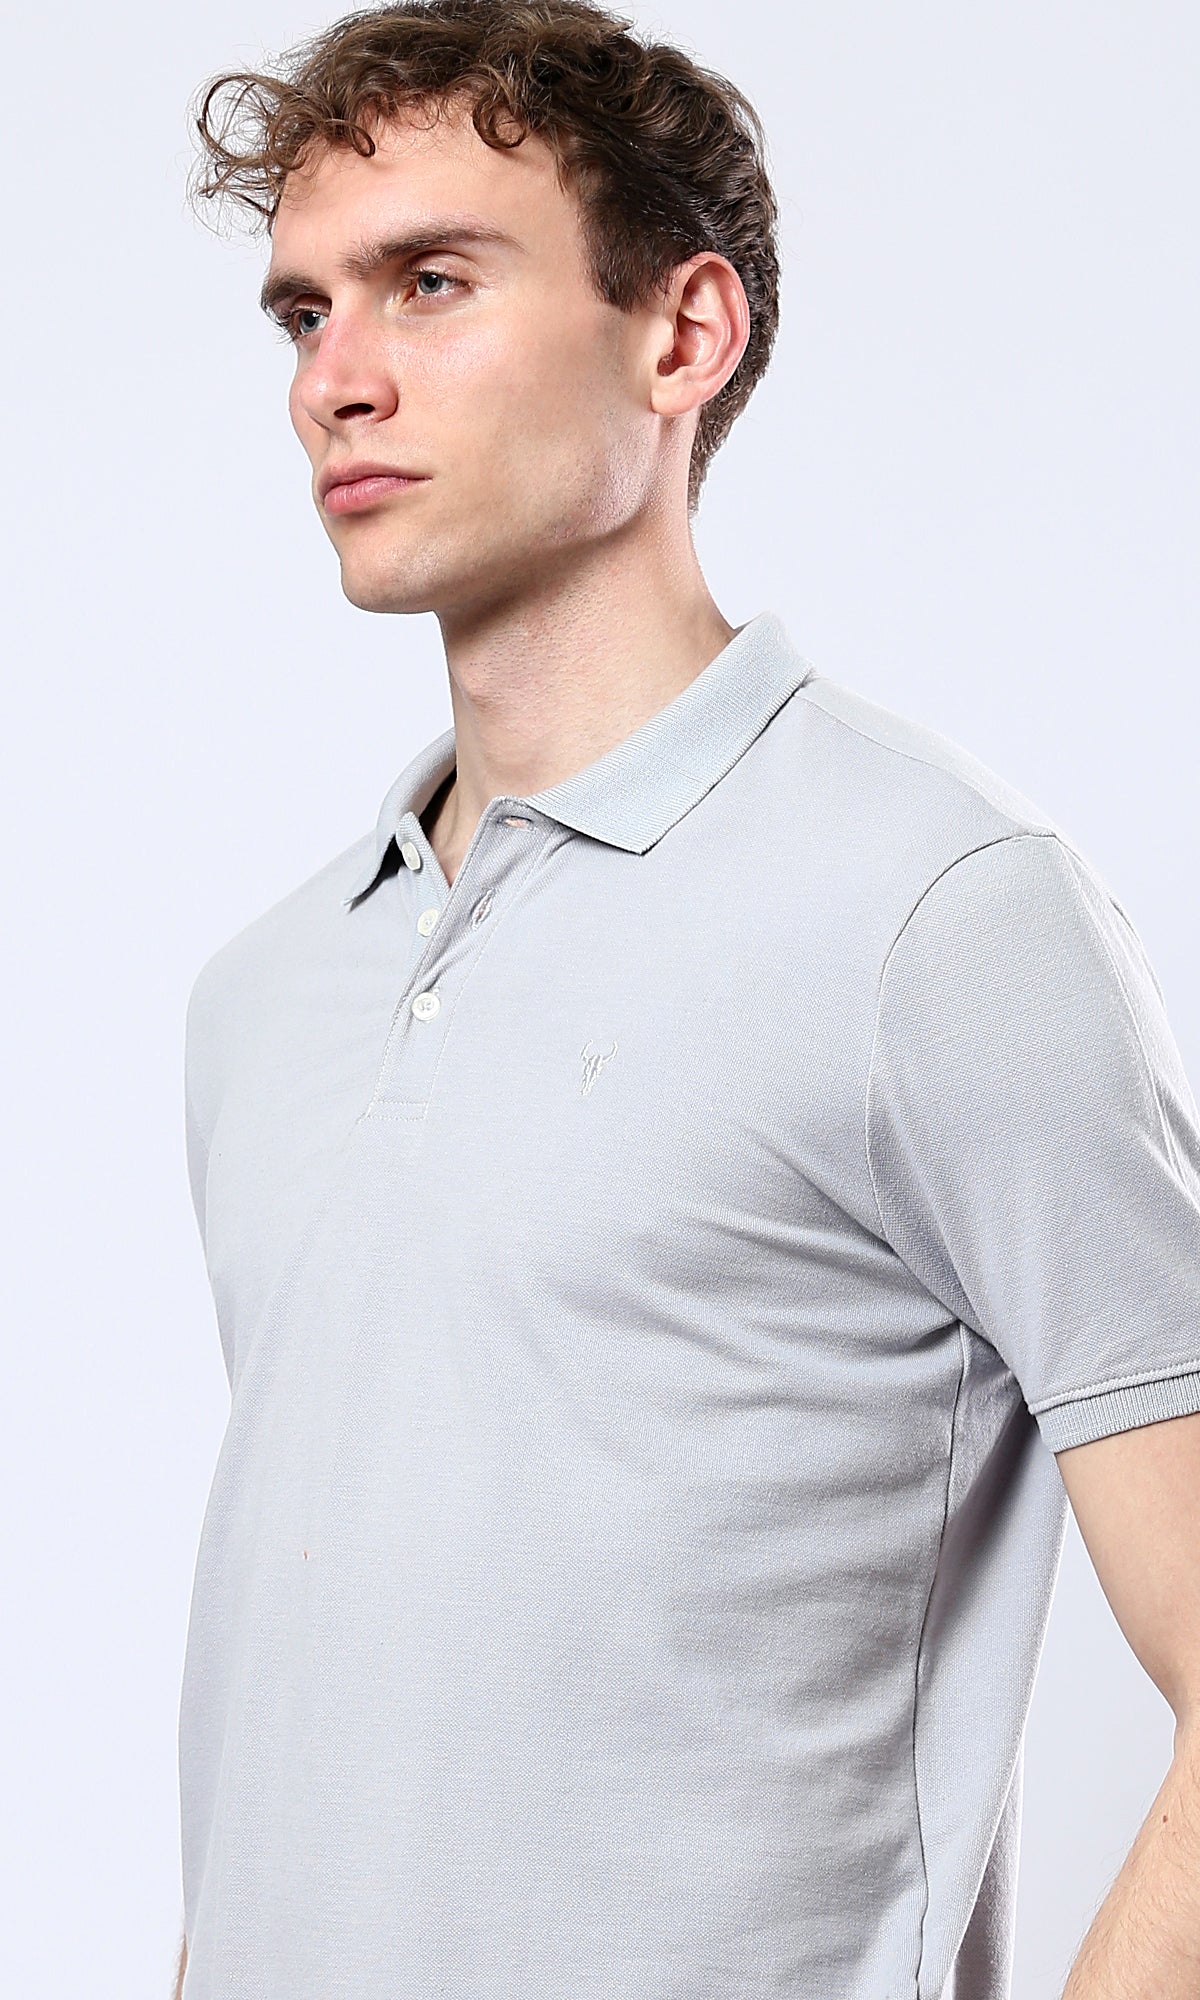 O178889 Light Grey Solid Polo Shirt With Classic Collar